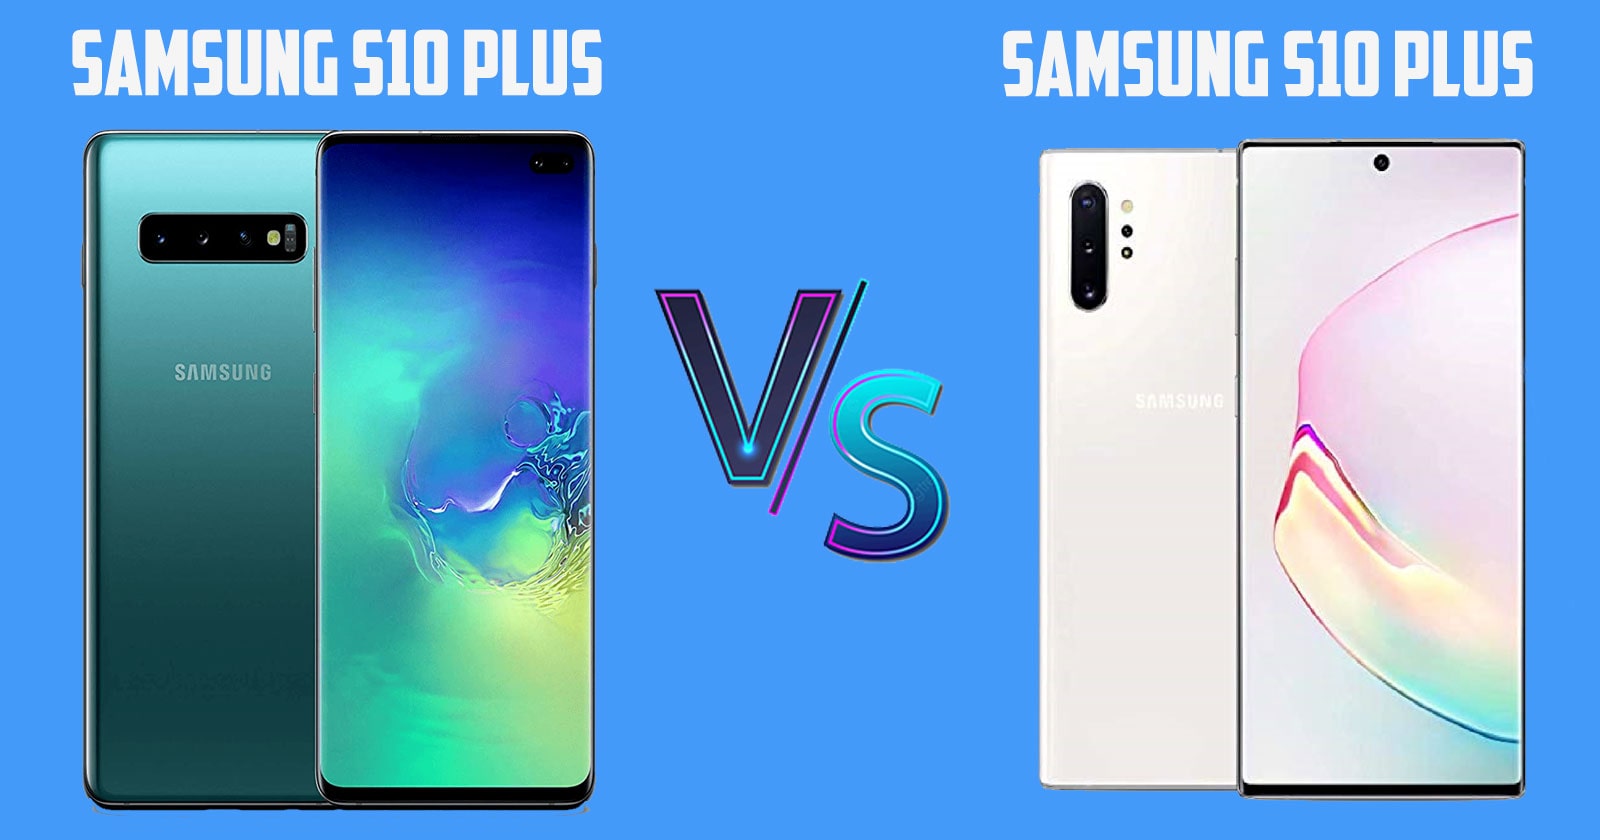 What is the difference between samsung s10 plus and note 10 plus?